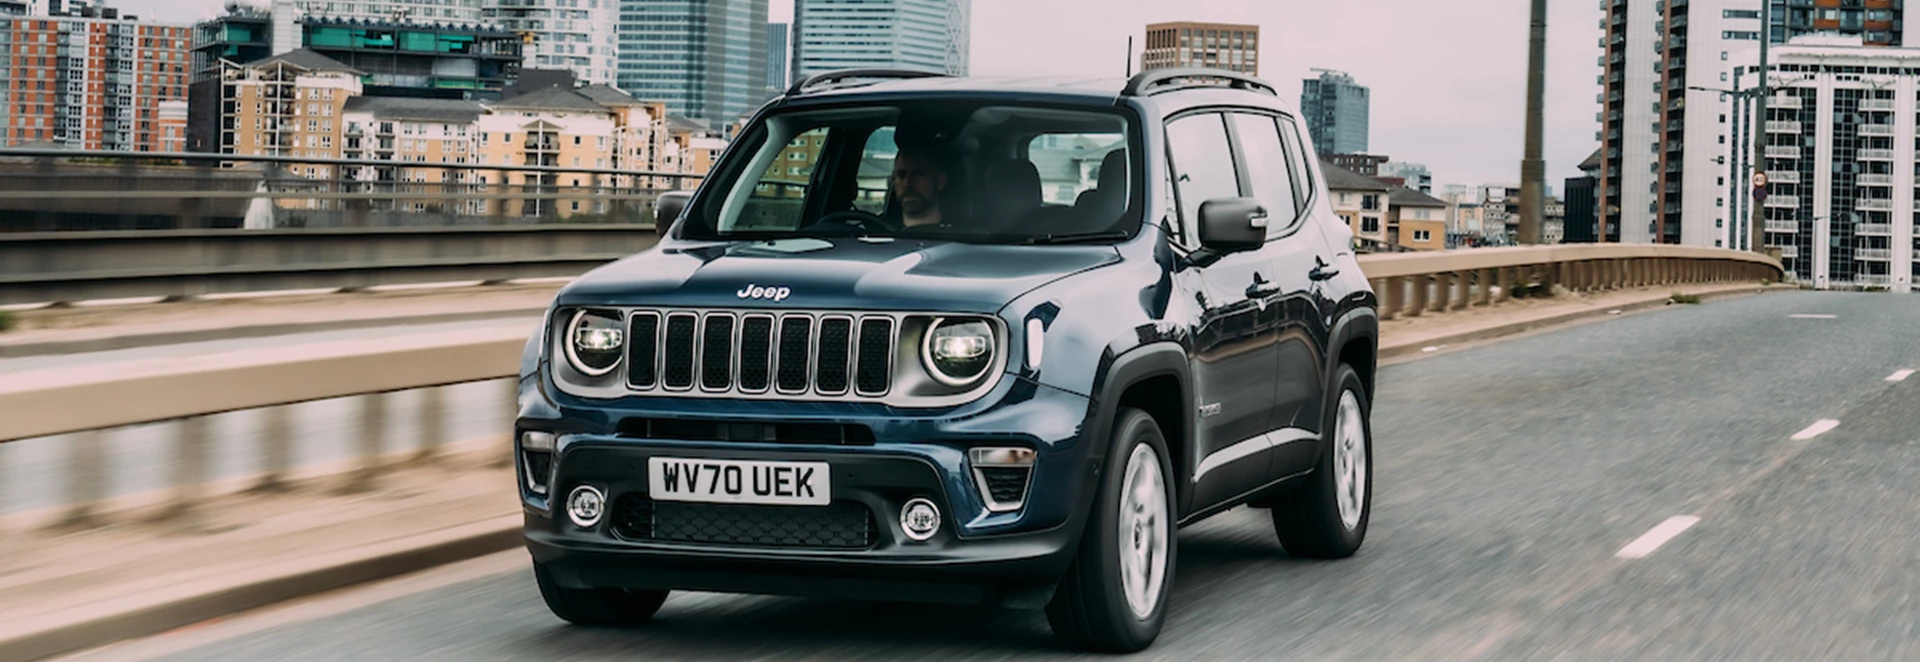 FCA Fleet: What electrified models are available? 